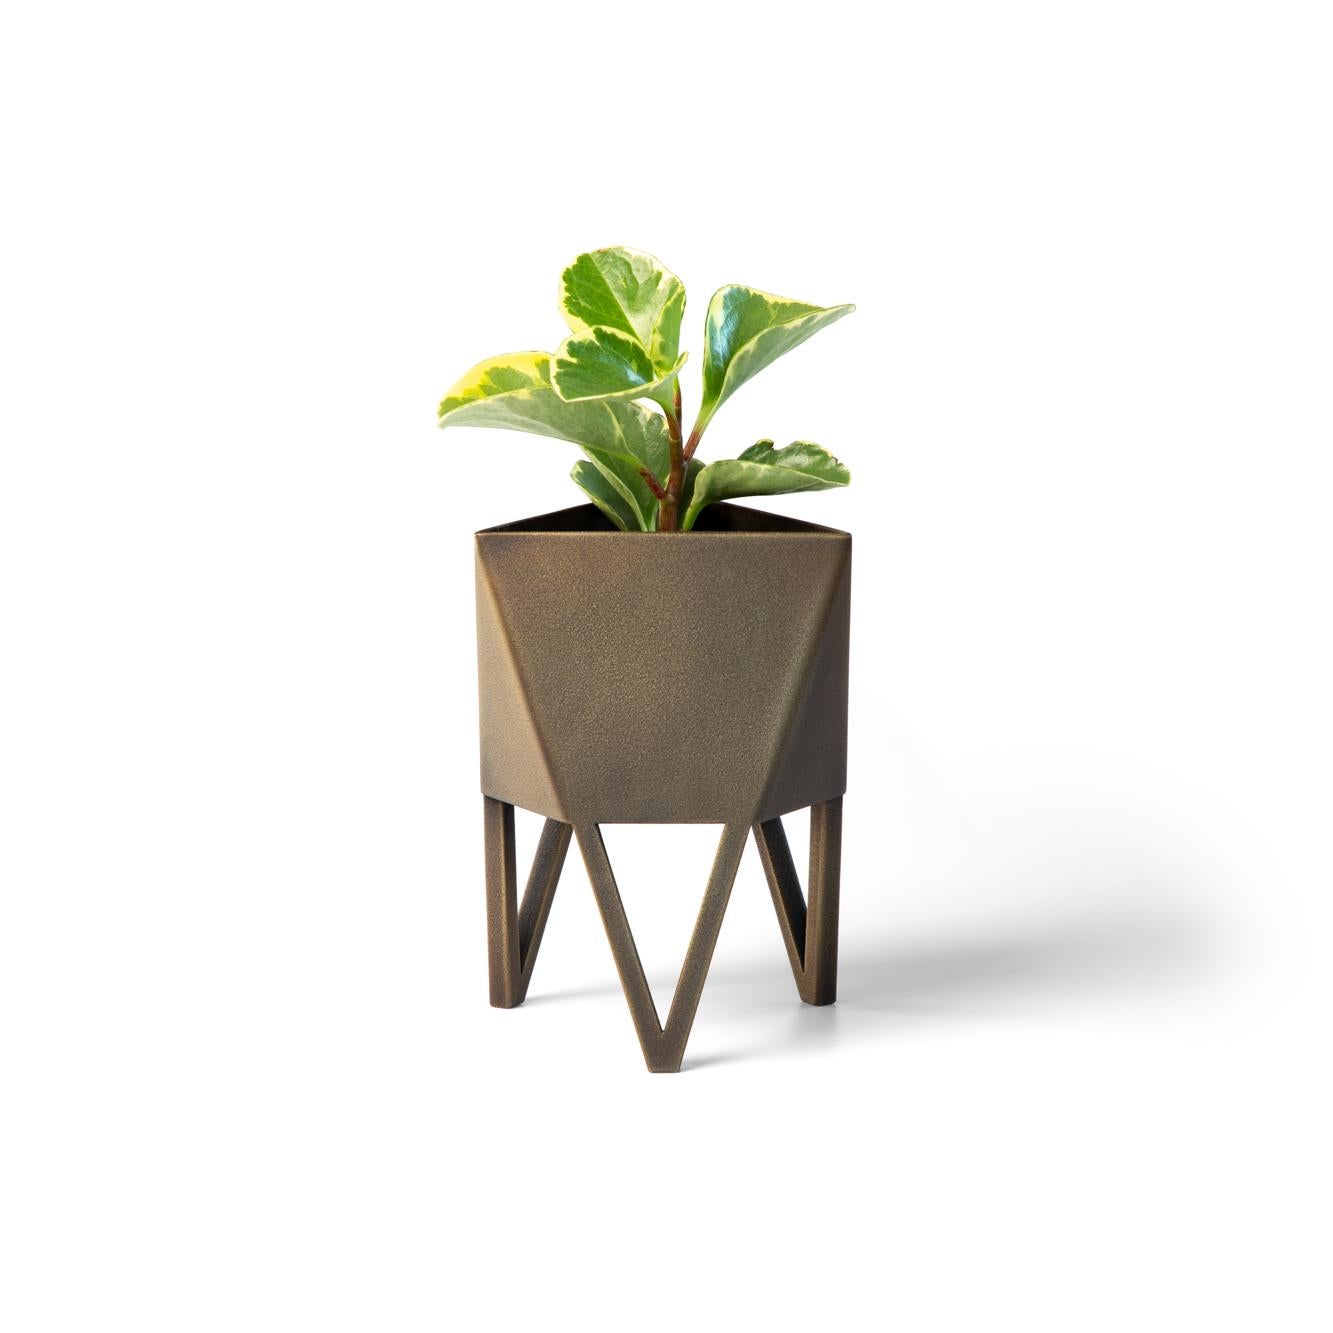 Small Deca Planter in Mint by Force/Collide, 2020 10